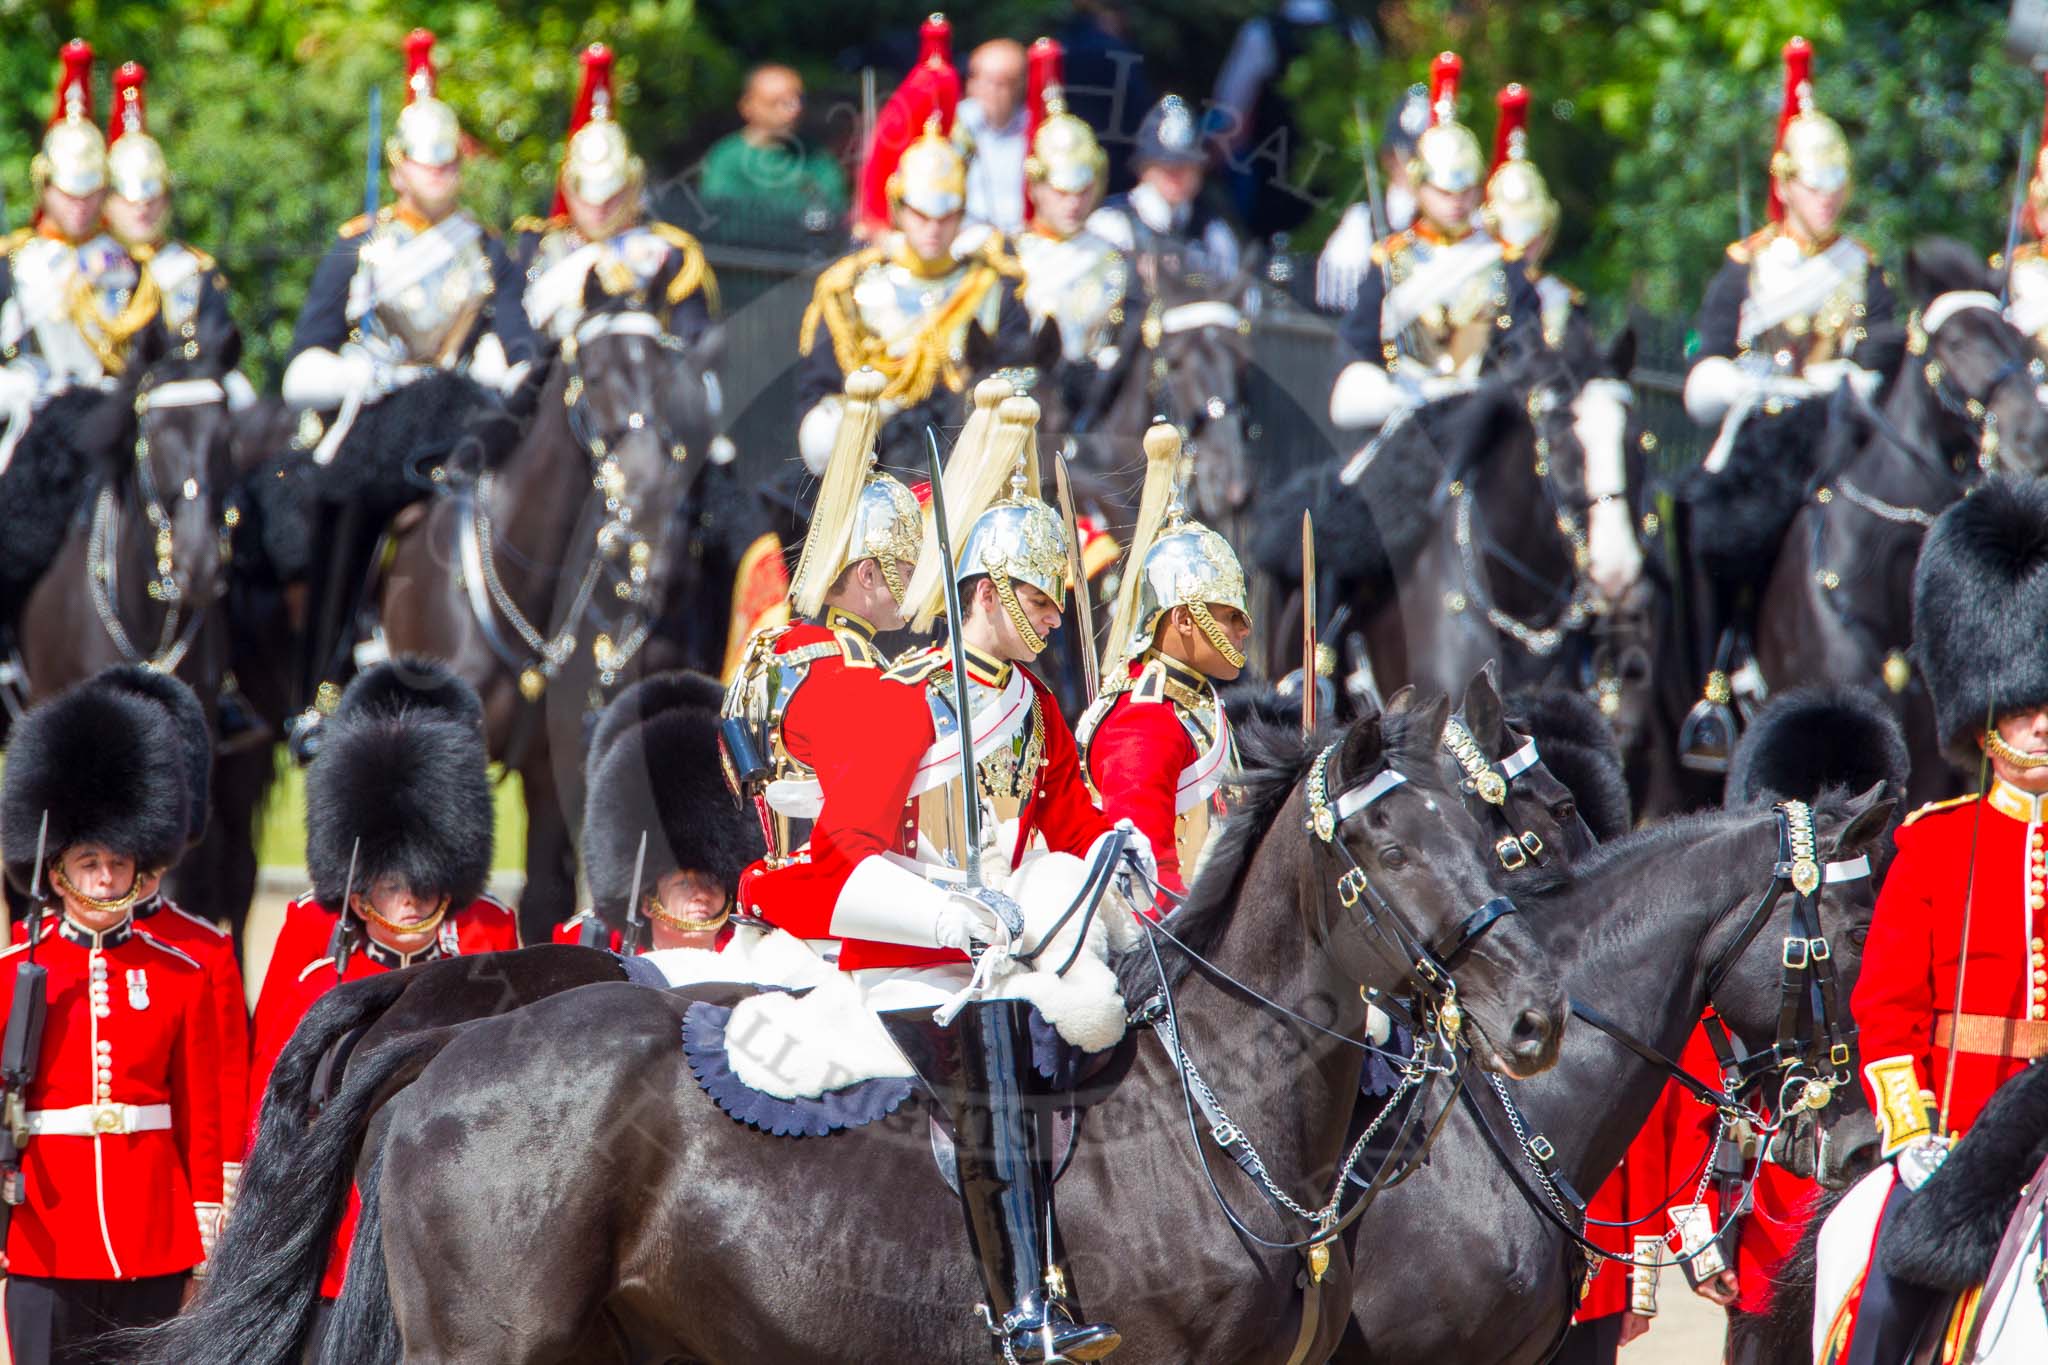 The Colonel's Review 2013: The Four Tropper of The Life Guards during the Inspection of the Line..
Horse Guards Parade, Westminster,
London SW1,

United Kingdom,
on 08 June 2013 at 11:02, image #337